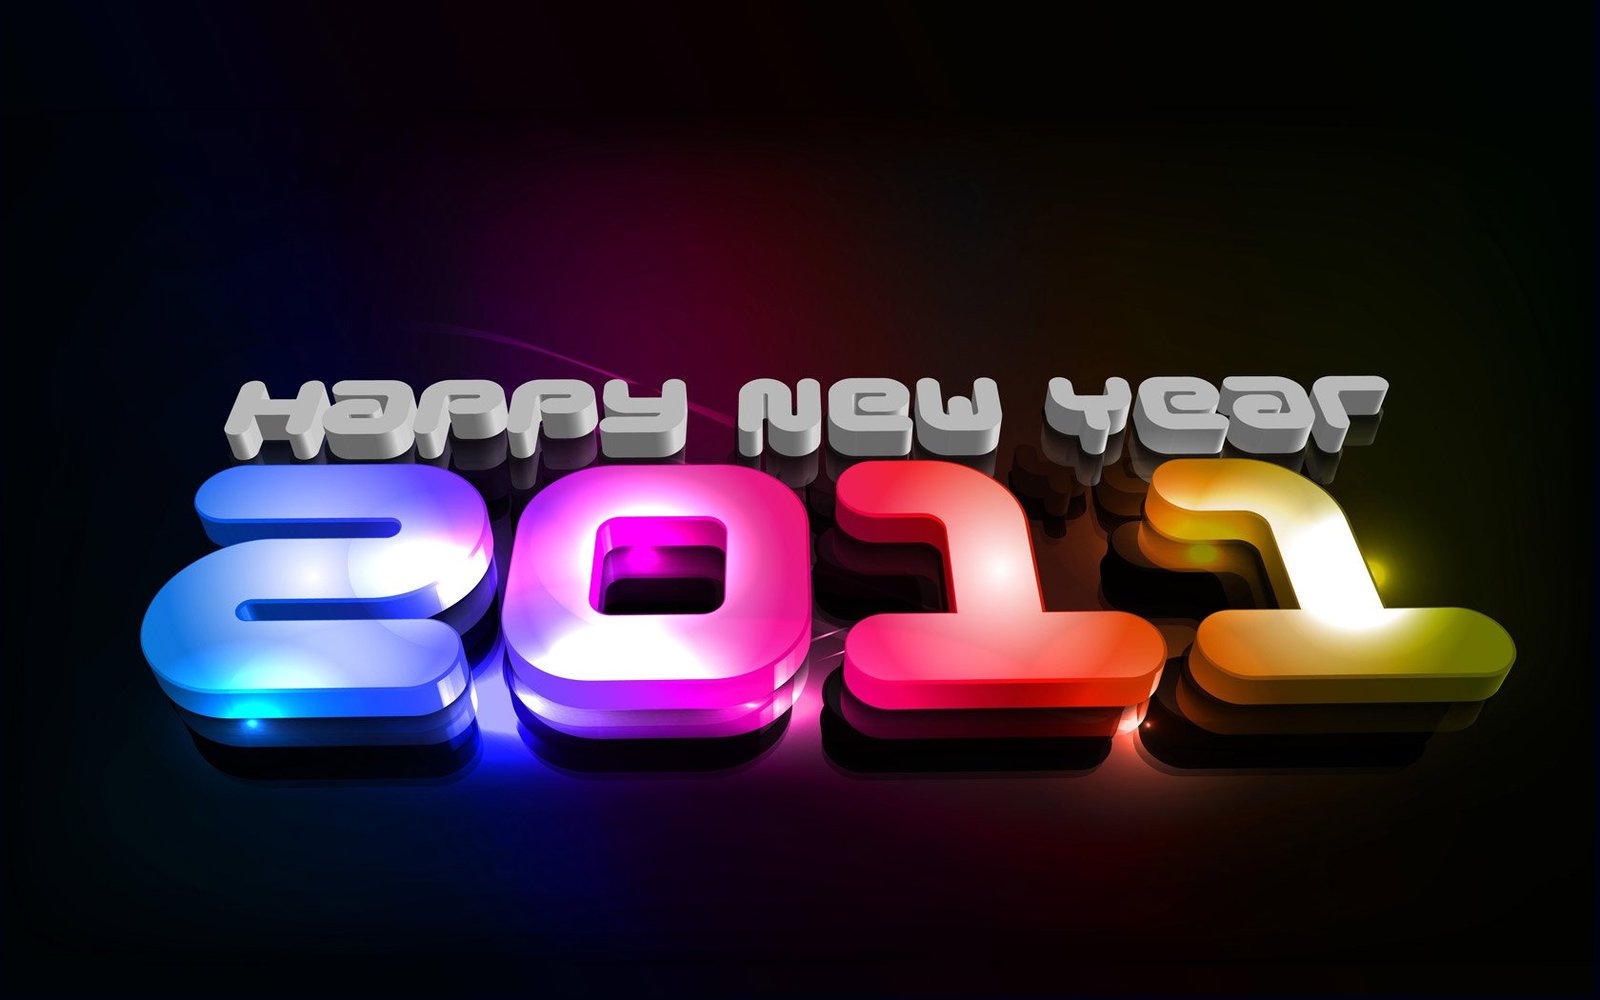 New Year 2011 wallpapers 8